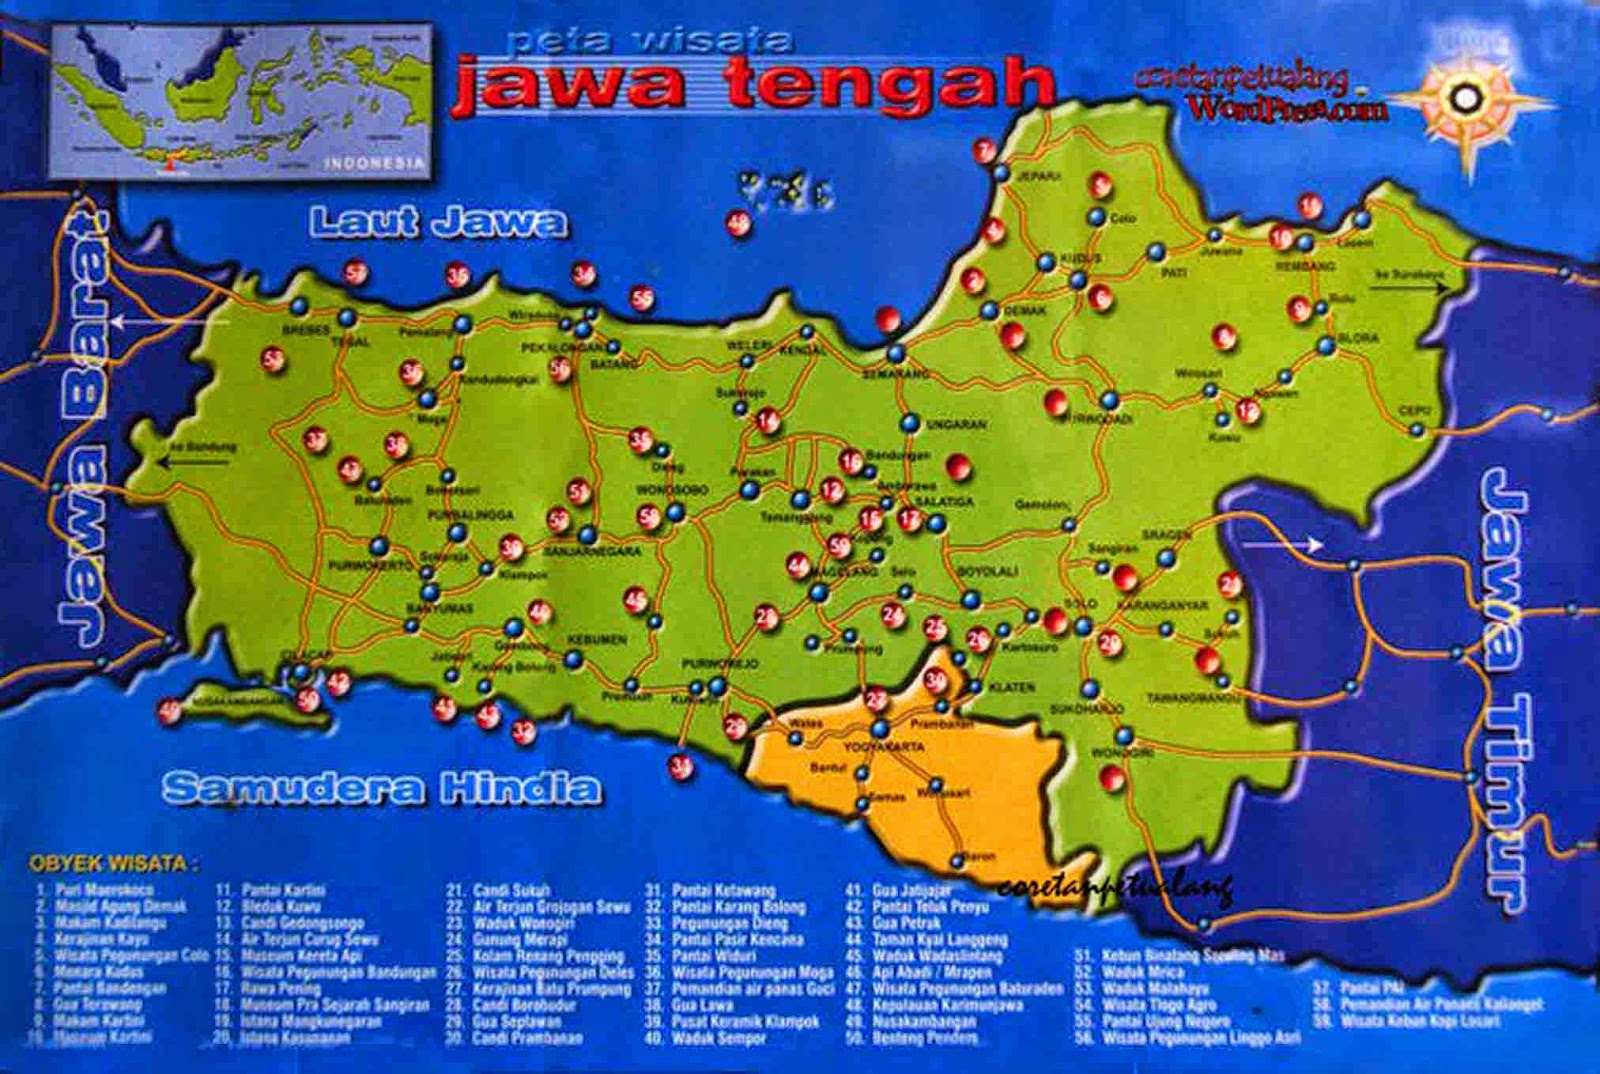  Tourist  destinations in the province of Central Java  